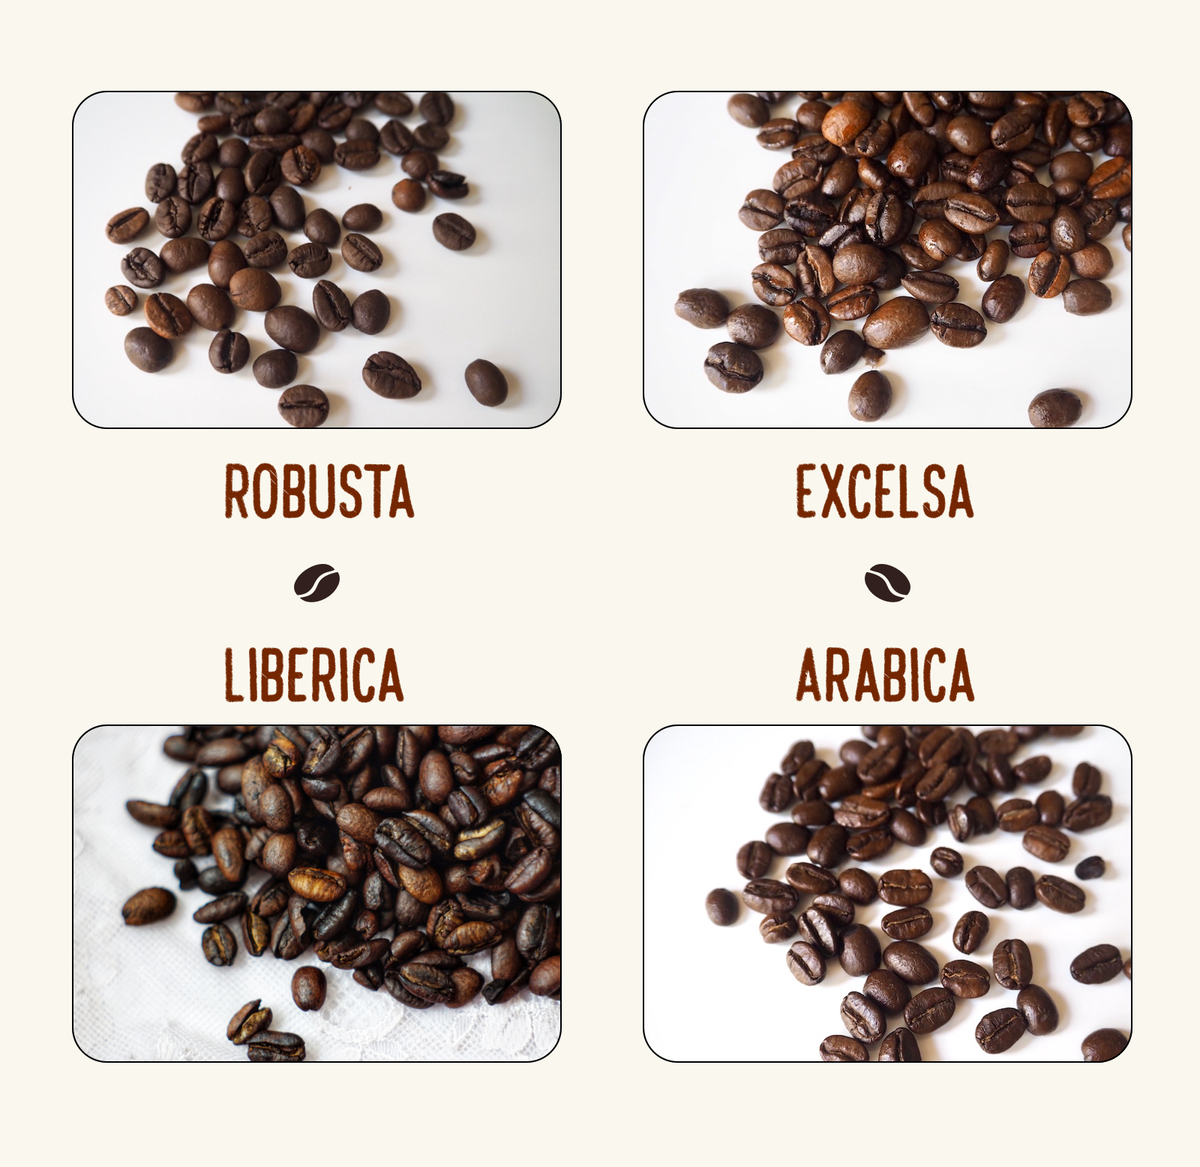 4 different types of coffee beans